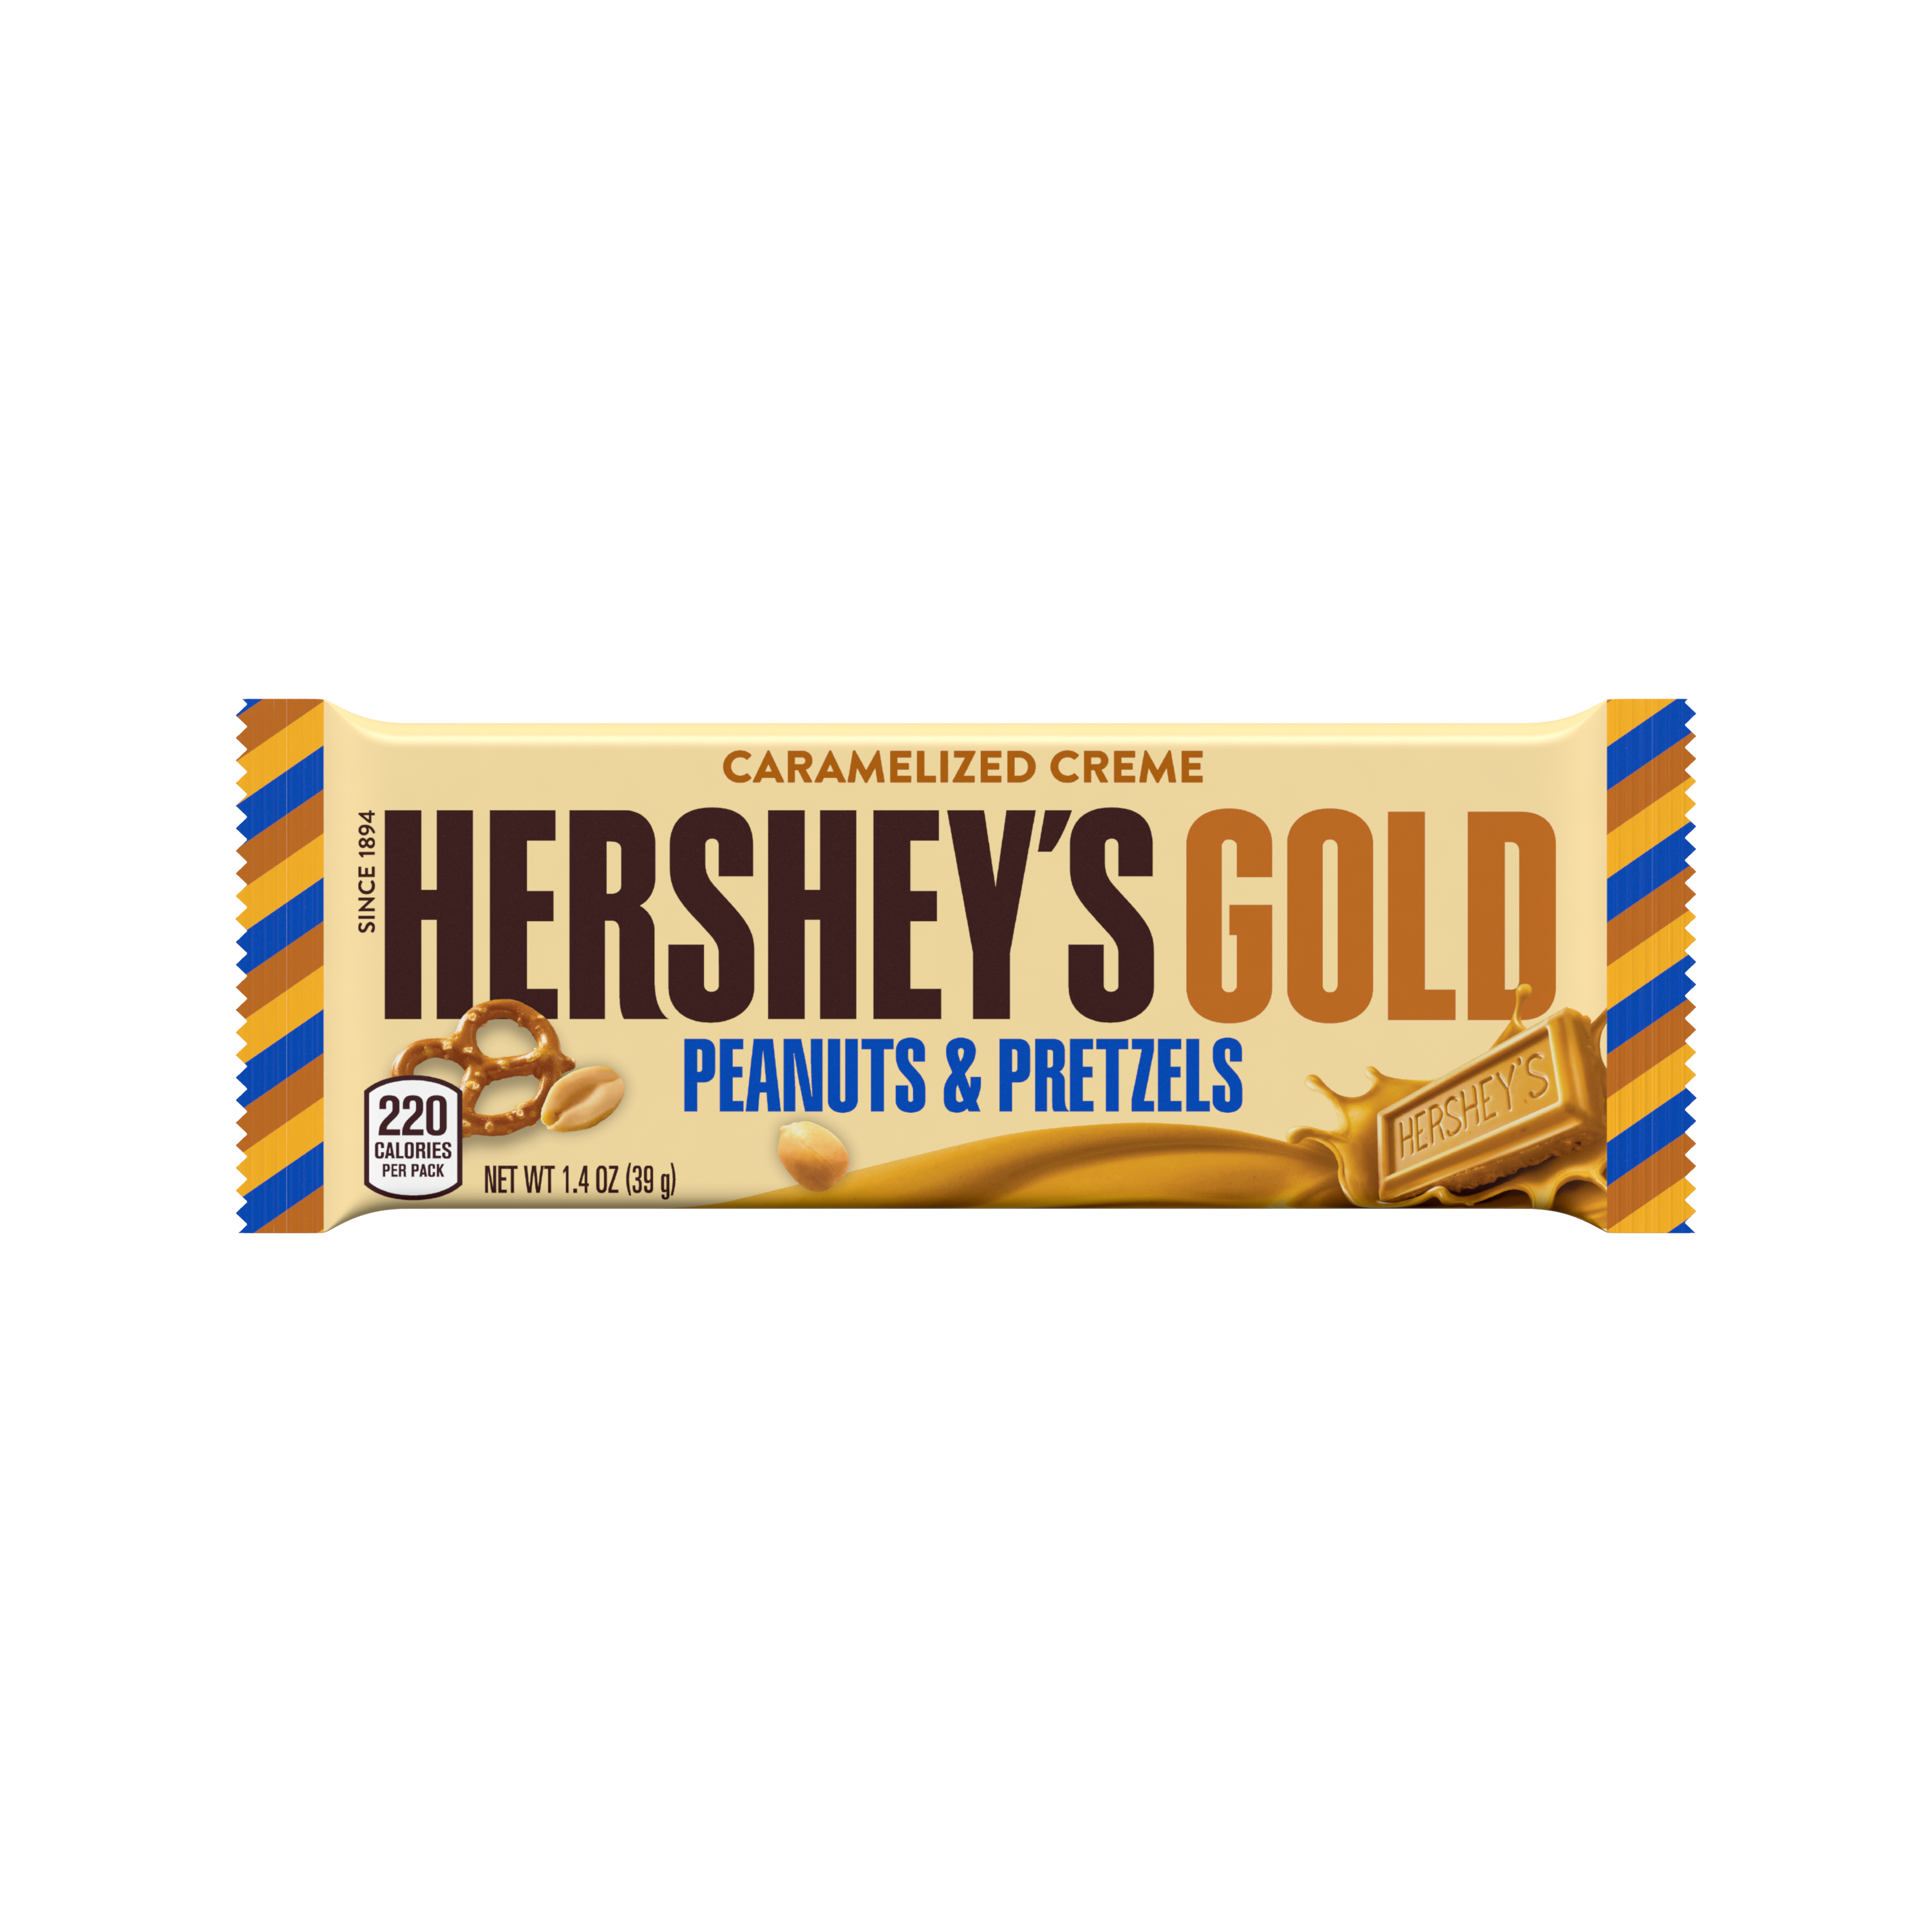 HERSHEY'S GOLD Peanuts & Pretzels in Caramelized Creme Candy Bar, 1.4 oz - Front of Package